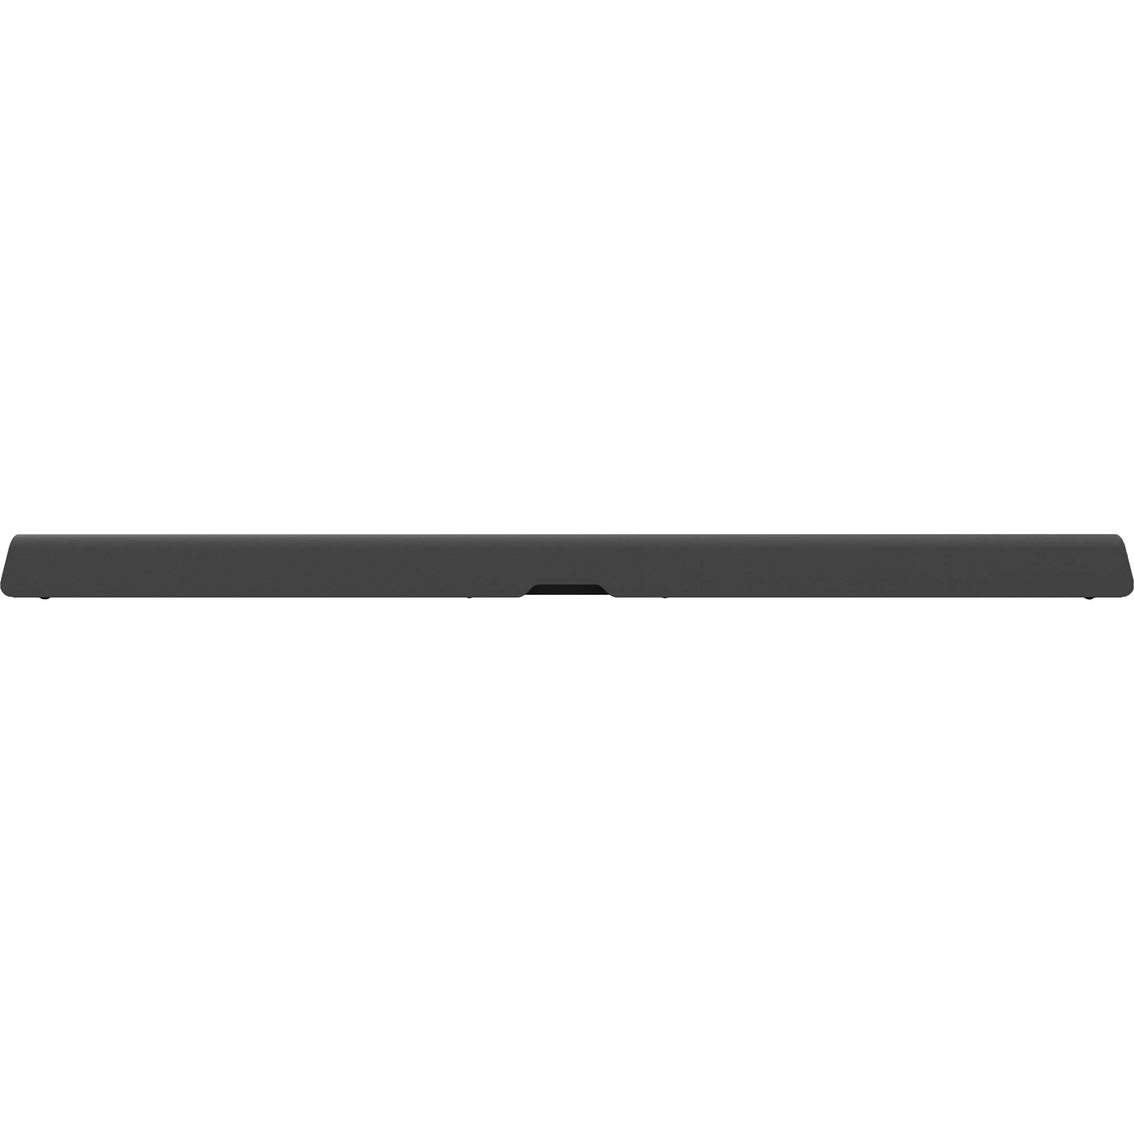 Vizio M-Series All-In-One 2.1 Sound Bar with Dolby Atmos and DTS:X - Image 2 of 8